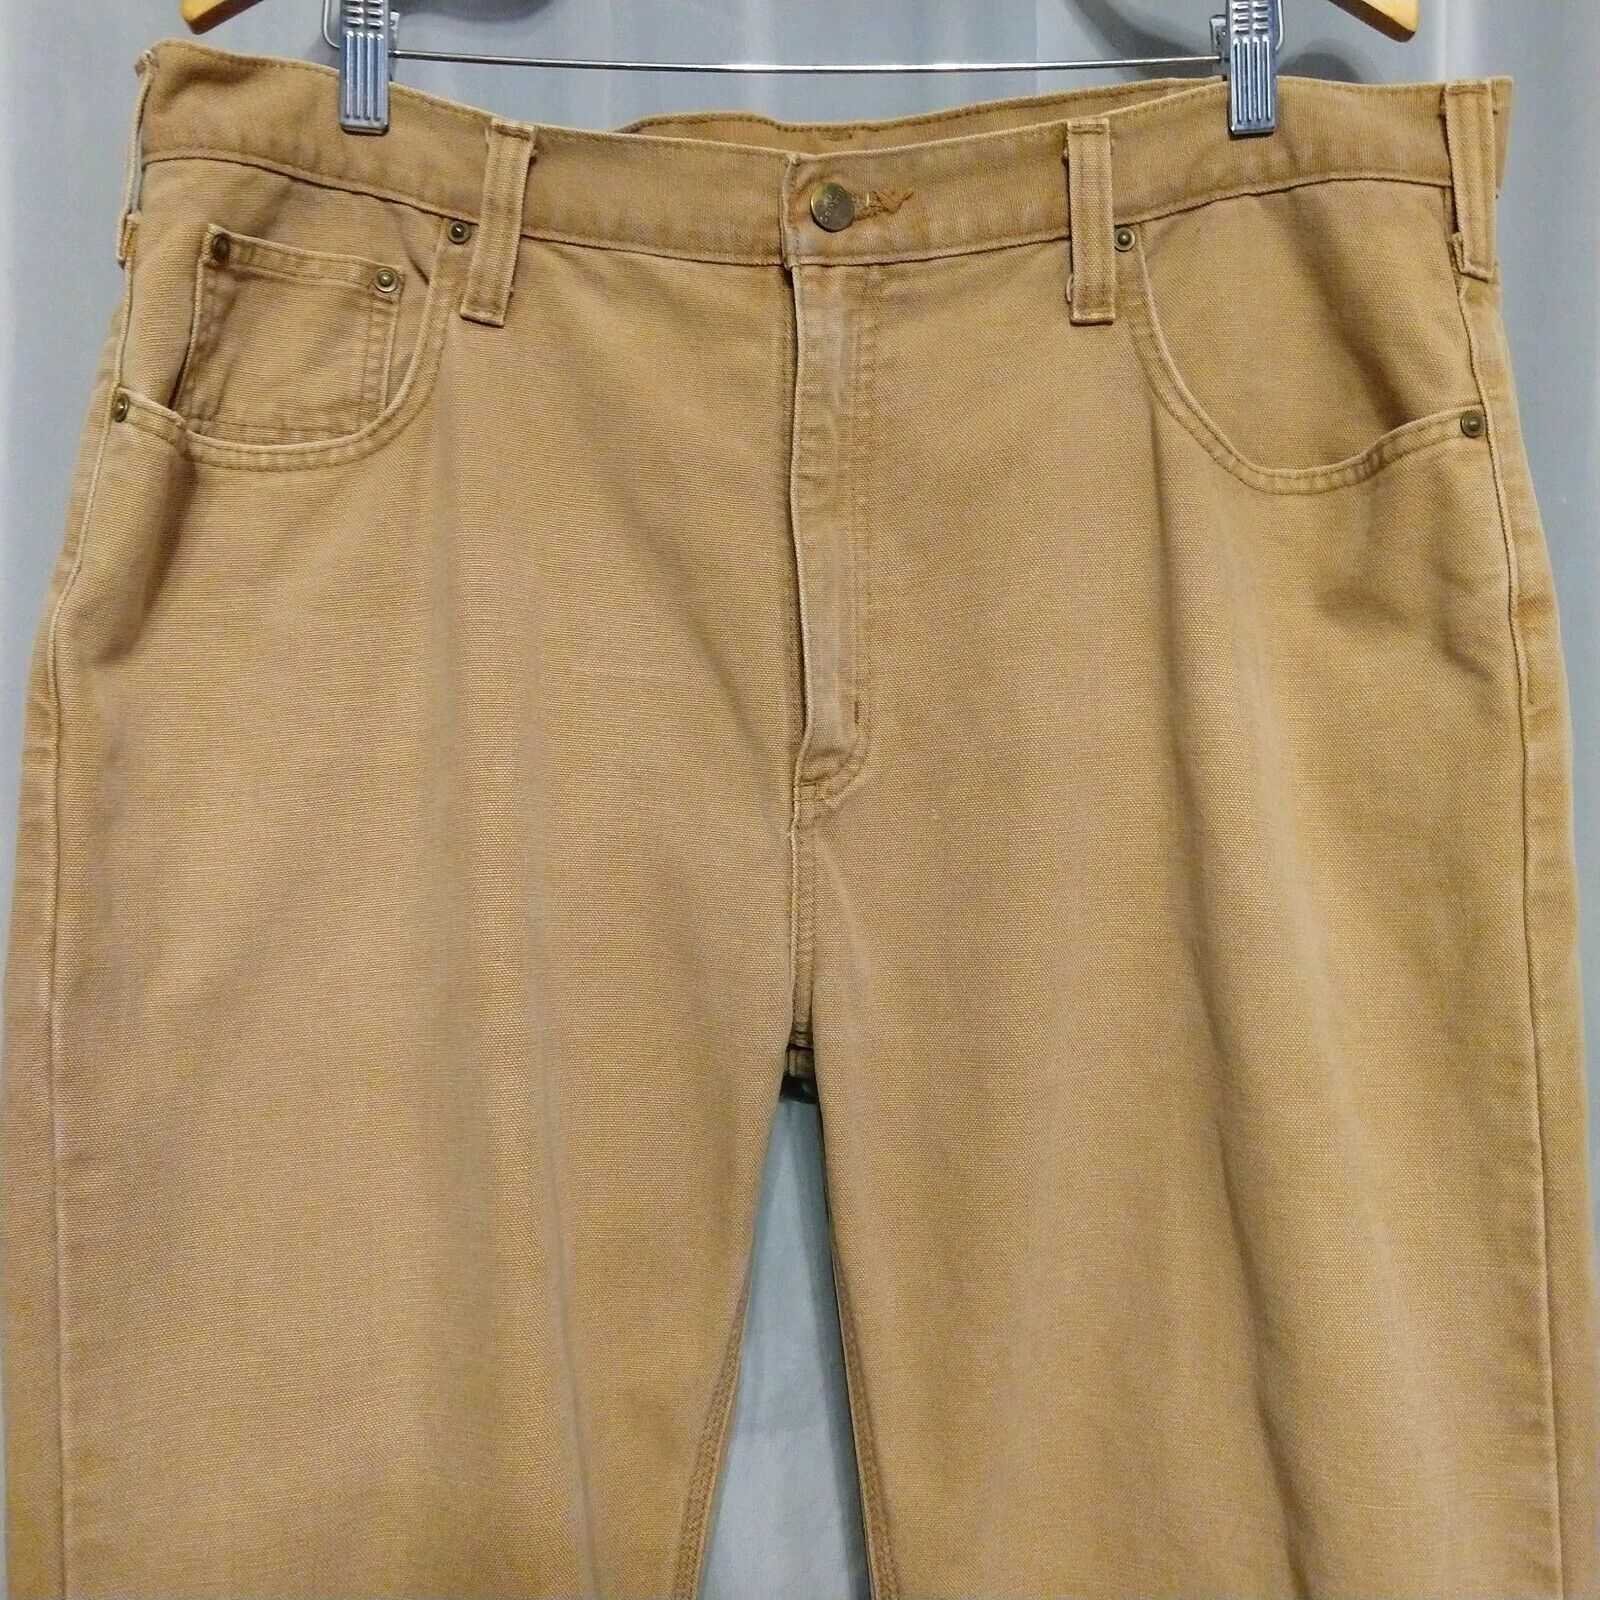 Carhartt Sturdy Jeans Pants 14806 Relaxed Fit Tan 100 Cotton Sz 40 X